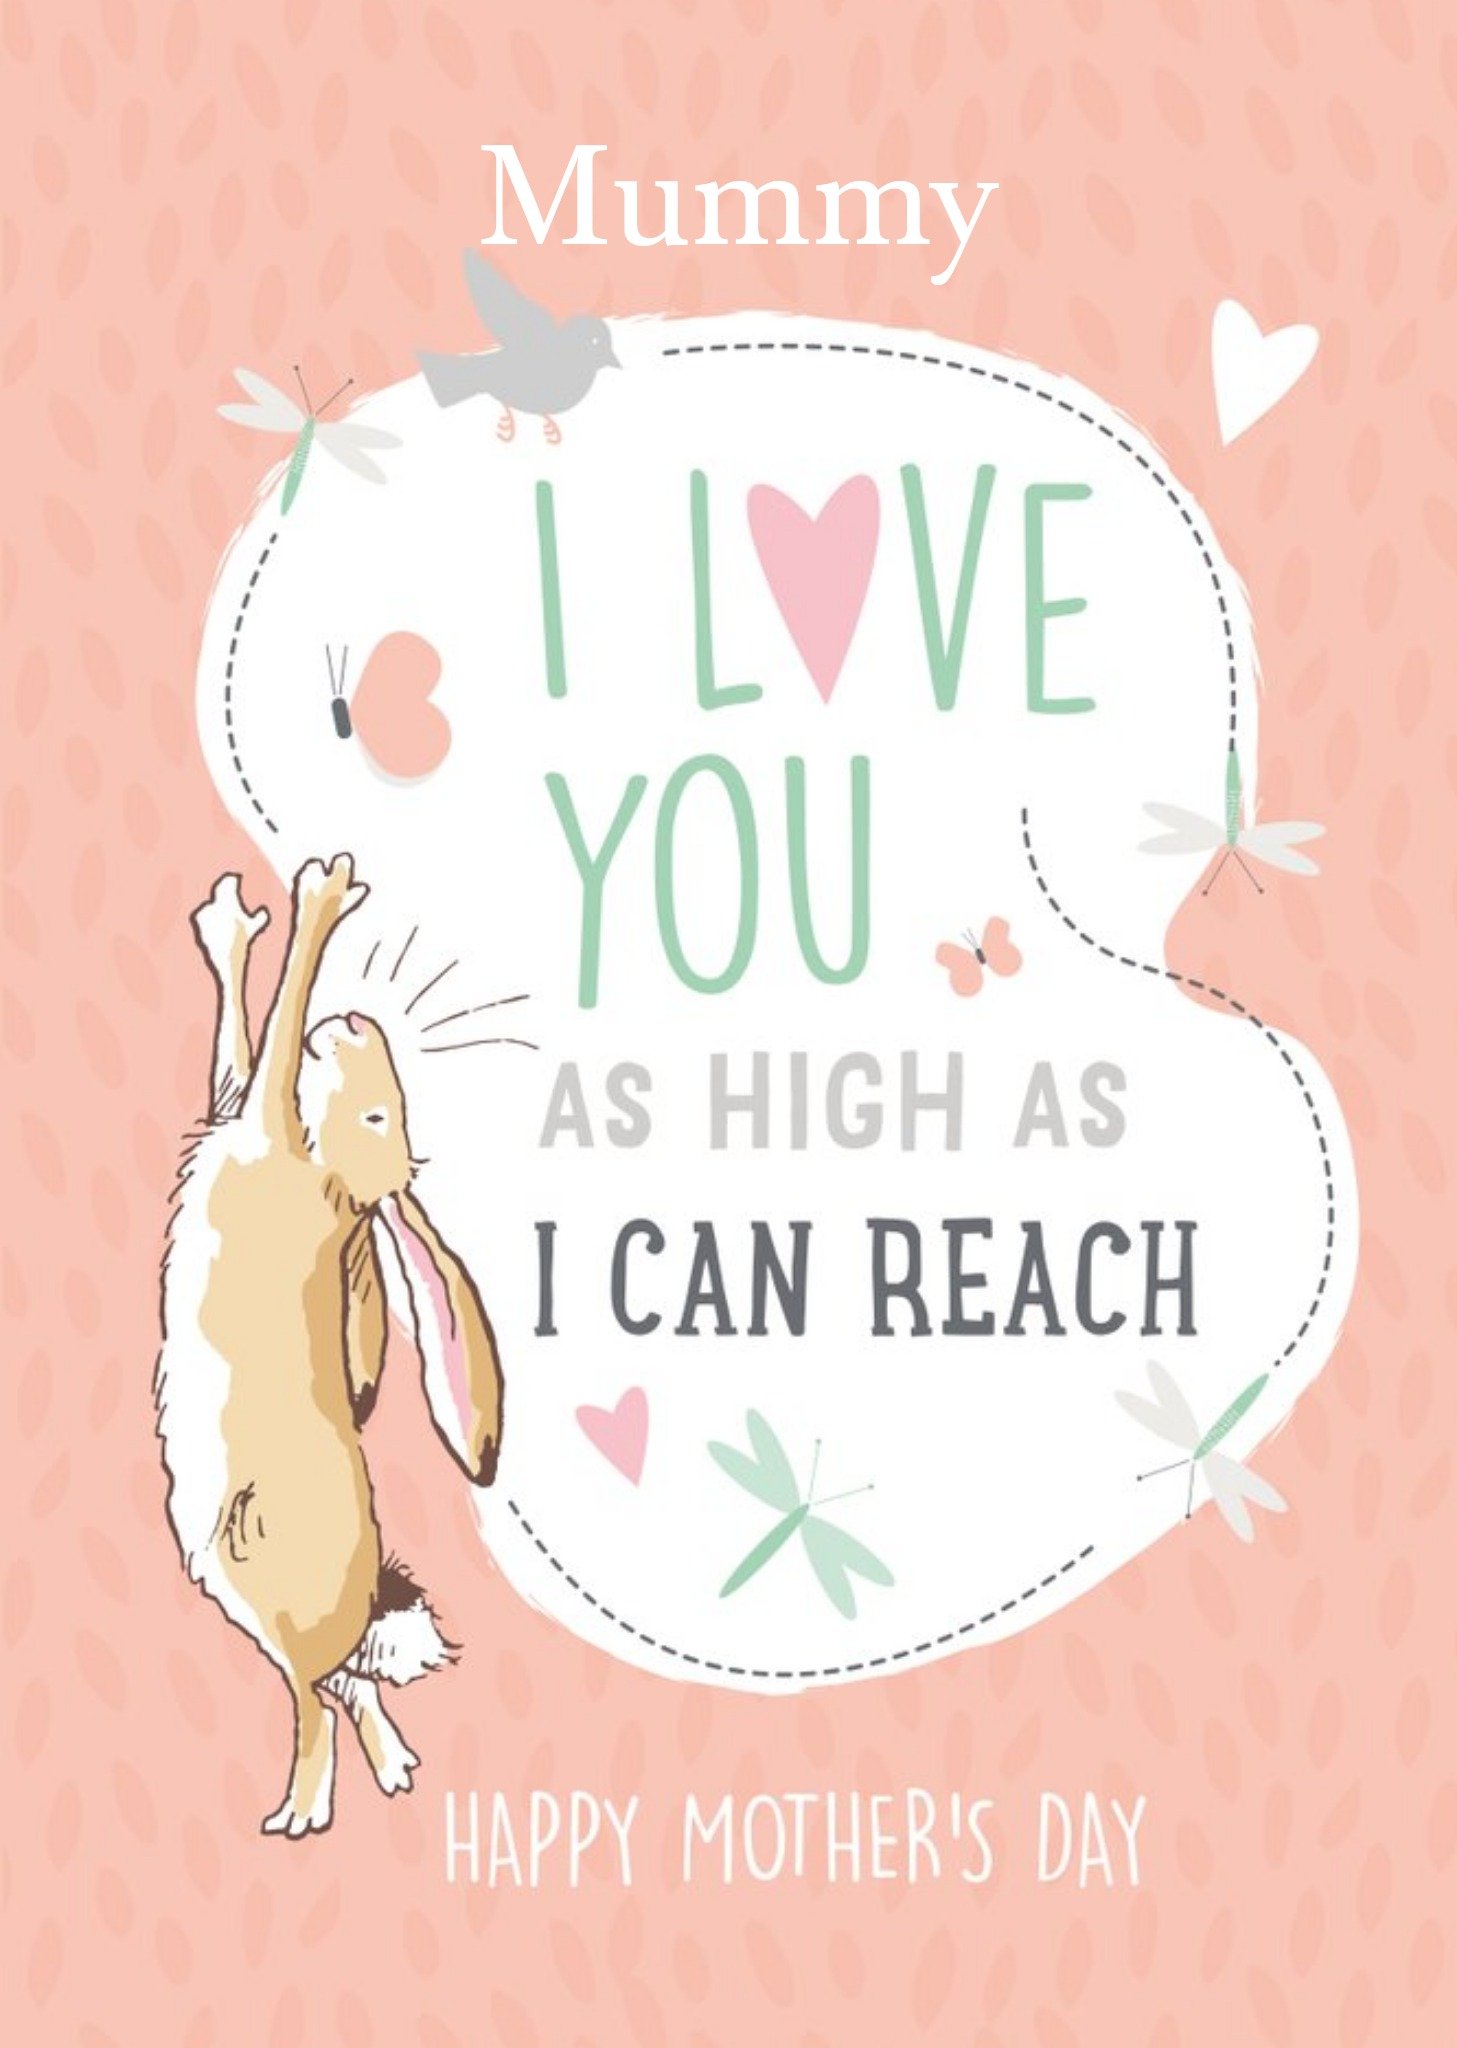 Guess How Much I Love You Danilo Ghmily Mummy I Love You As High As I Can Reach Card Ecard